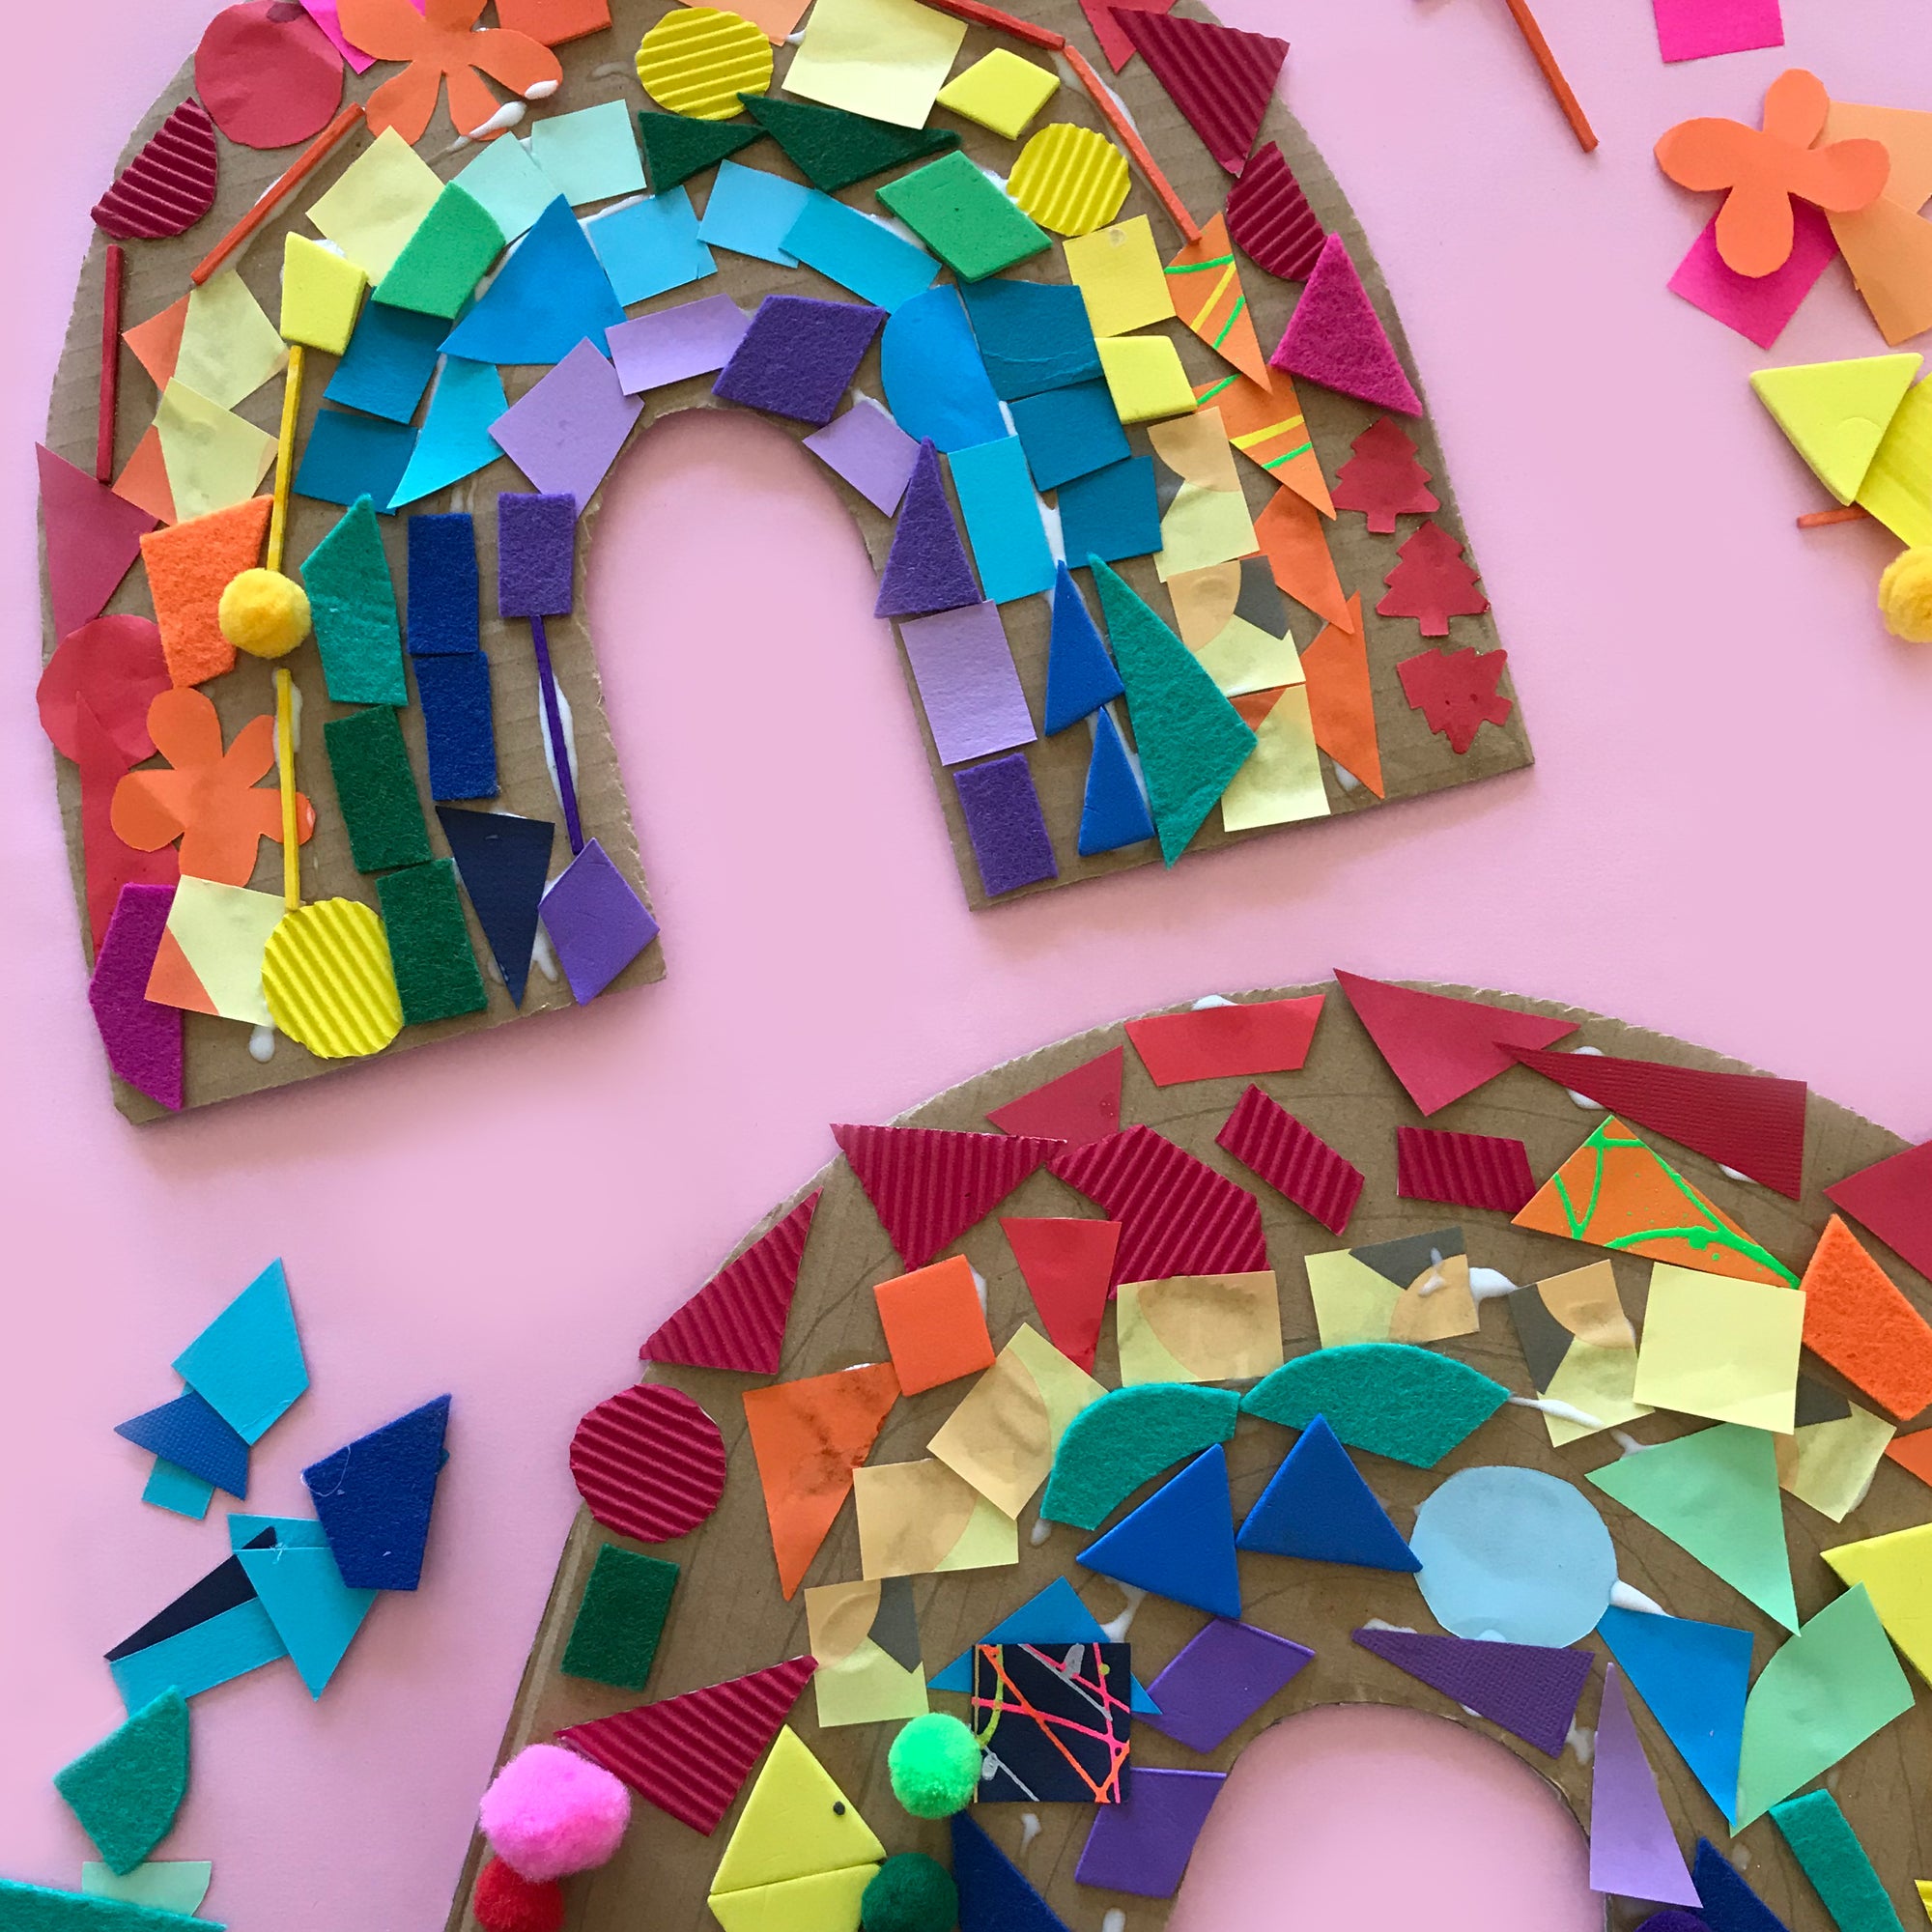 Easy Rainbow Craft for Toddlers: Rainbow Collage - The Mindful Toddler